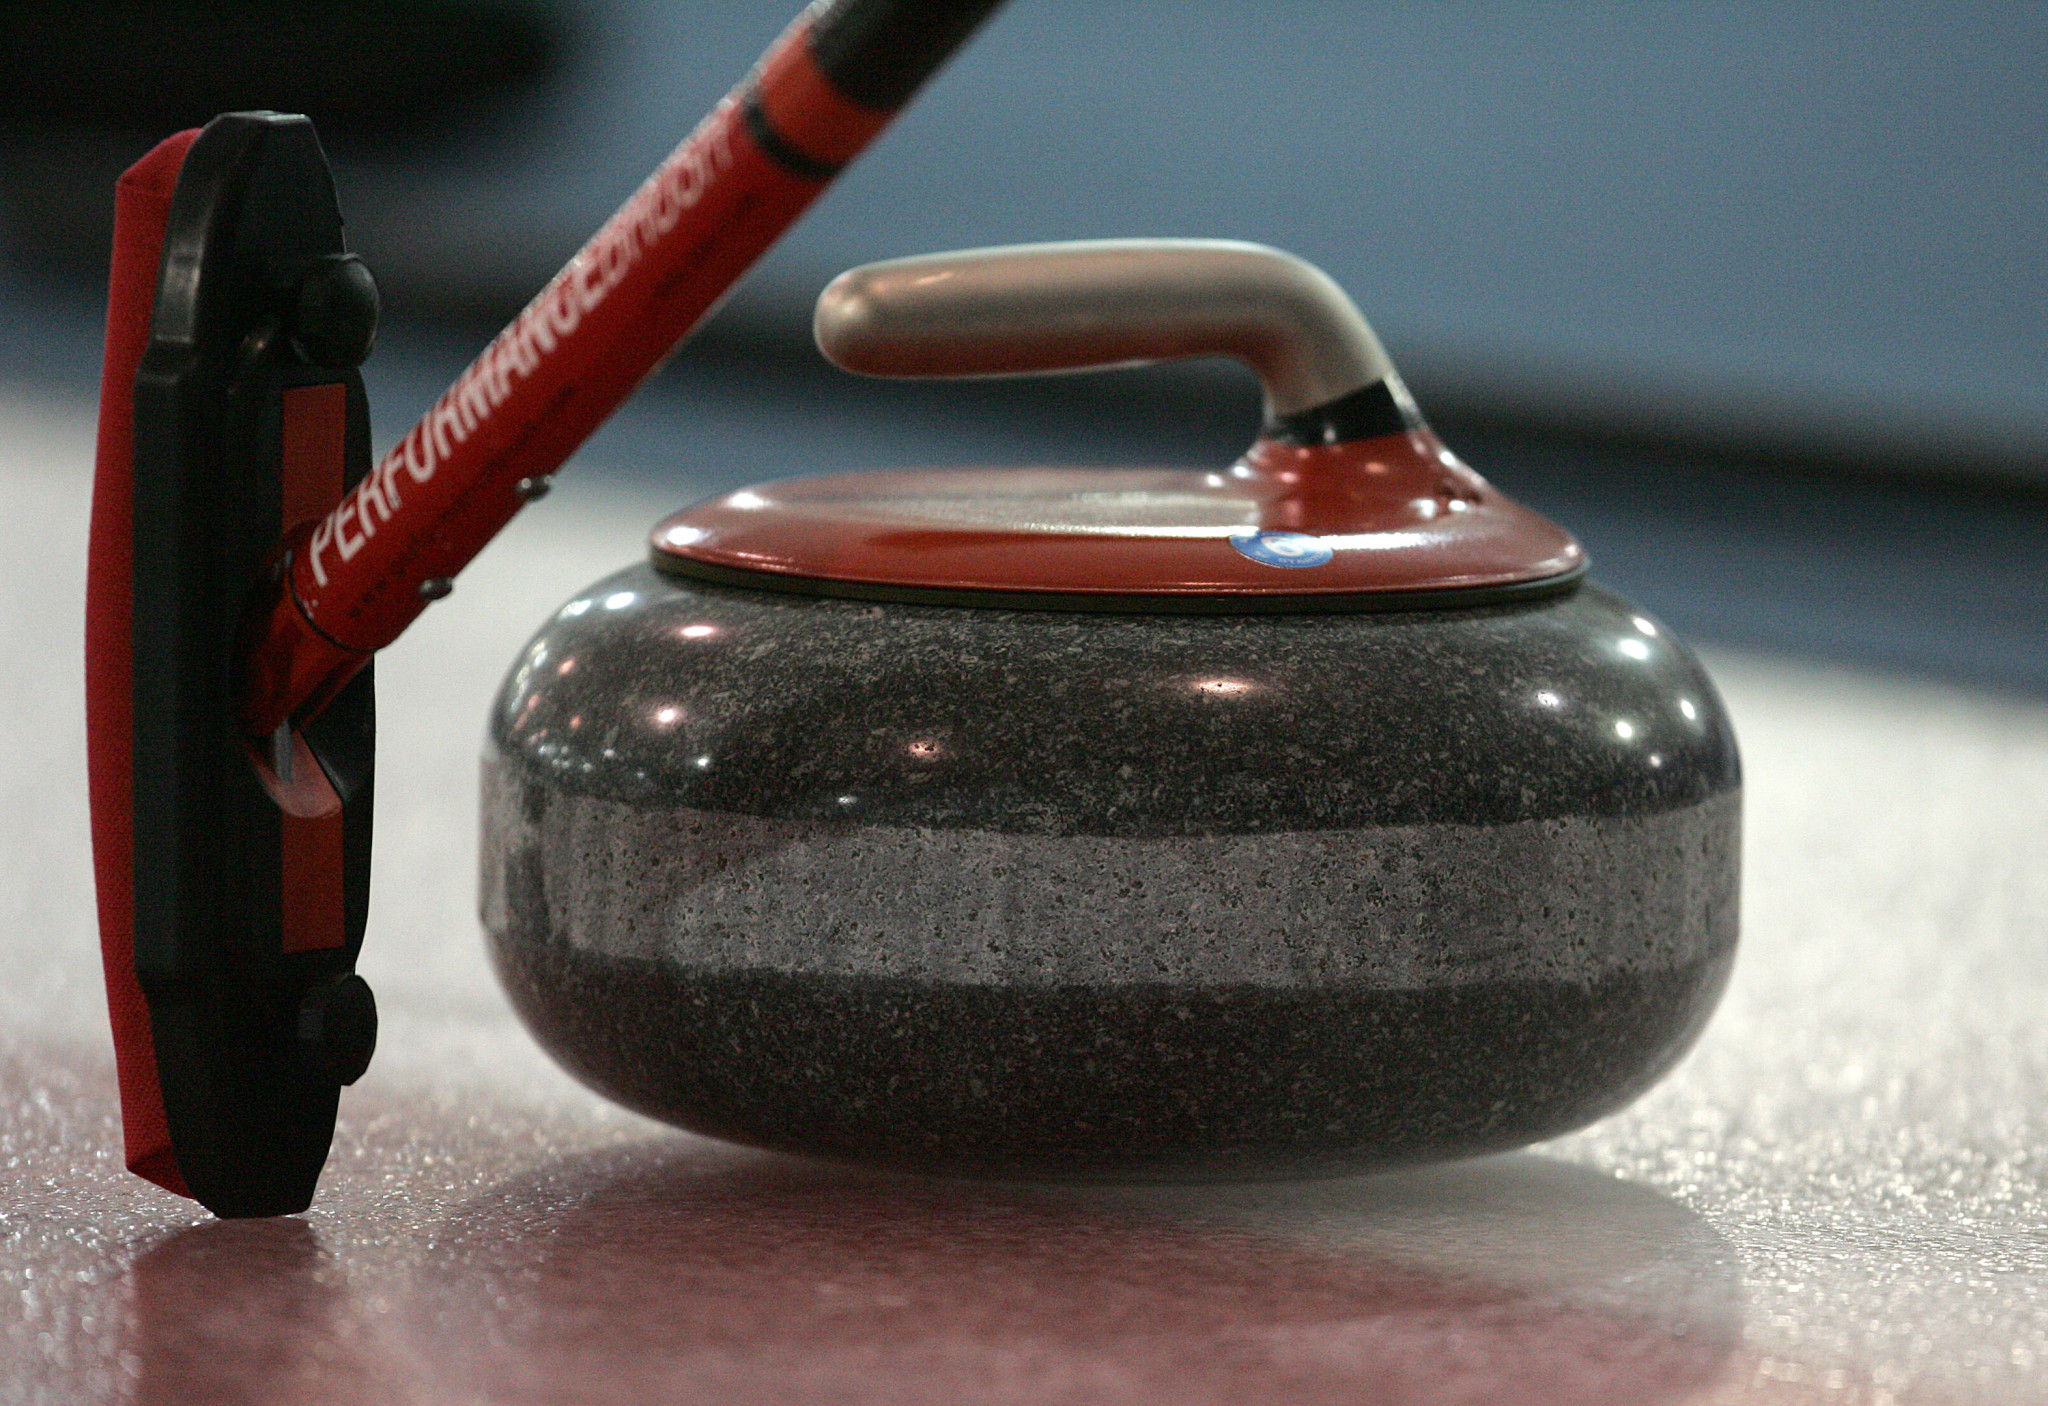 Round robin top two book World Championship places at curling World Qualification Event